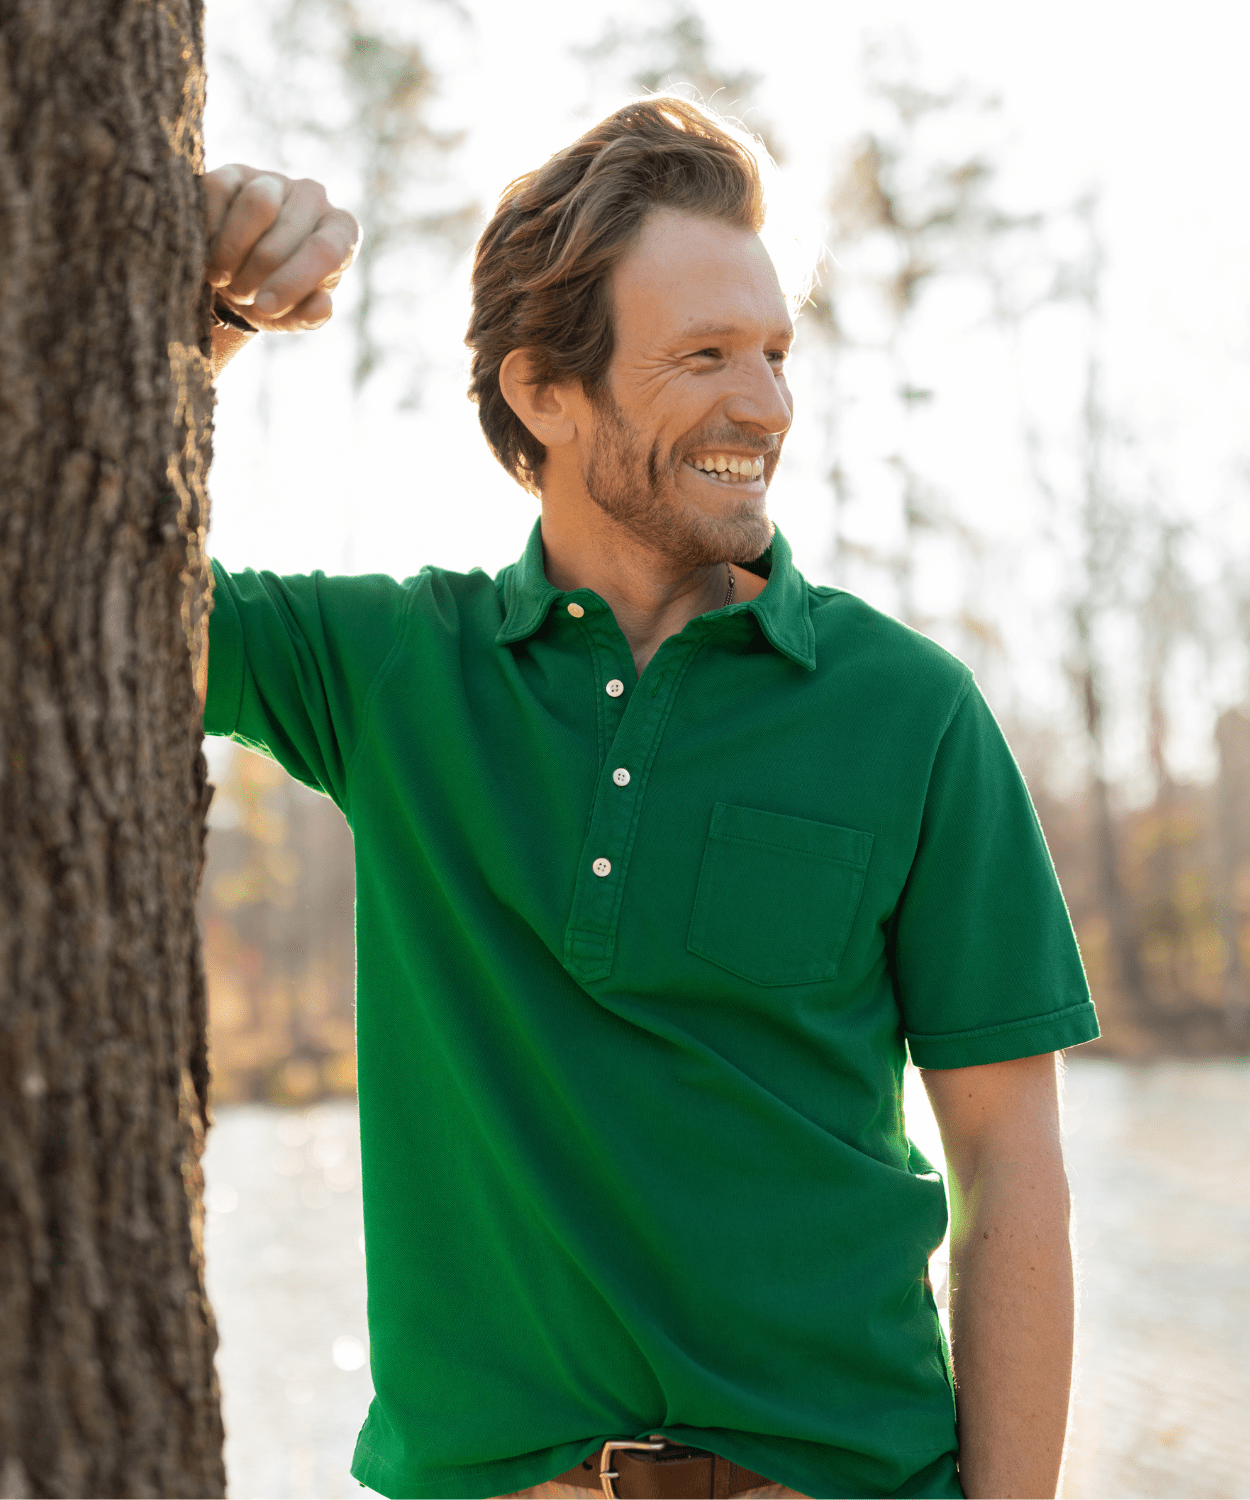 man standing by a tree wearing an oobe brand green polo shirt